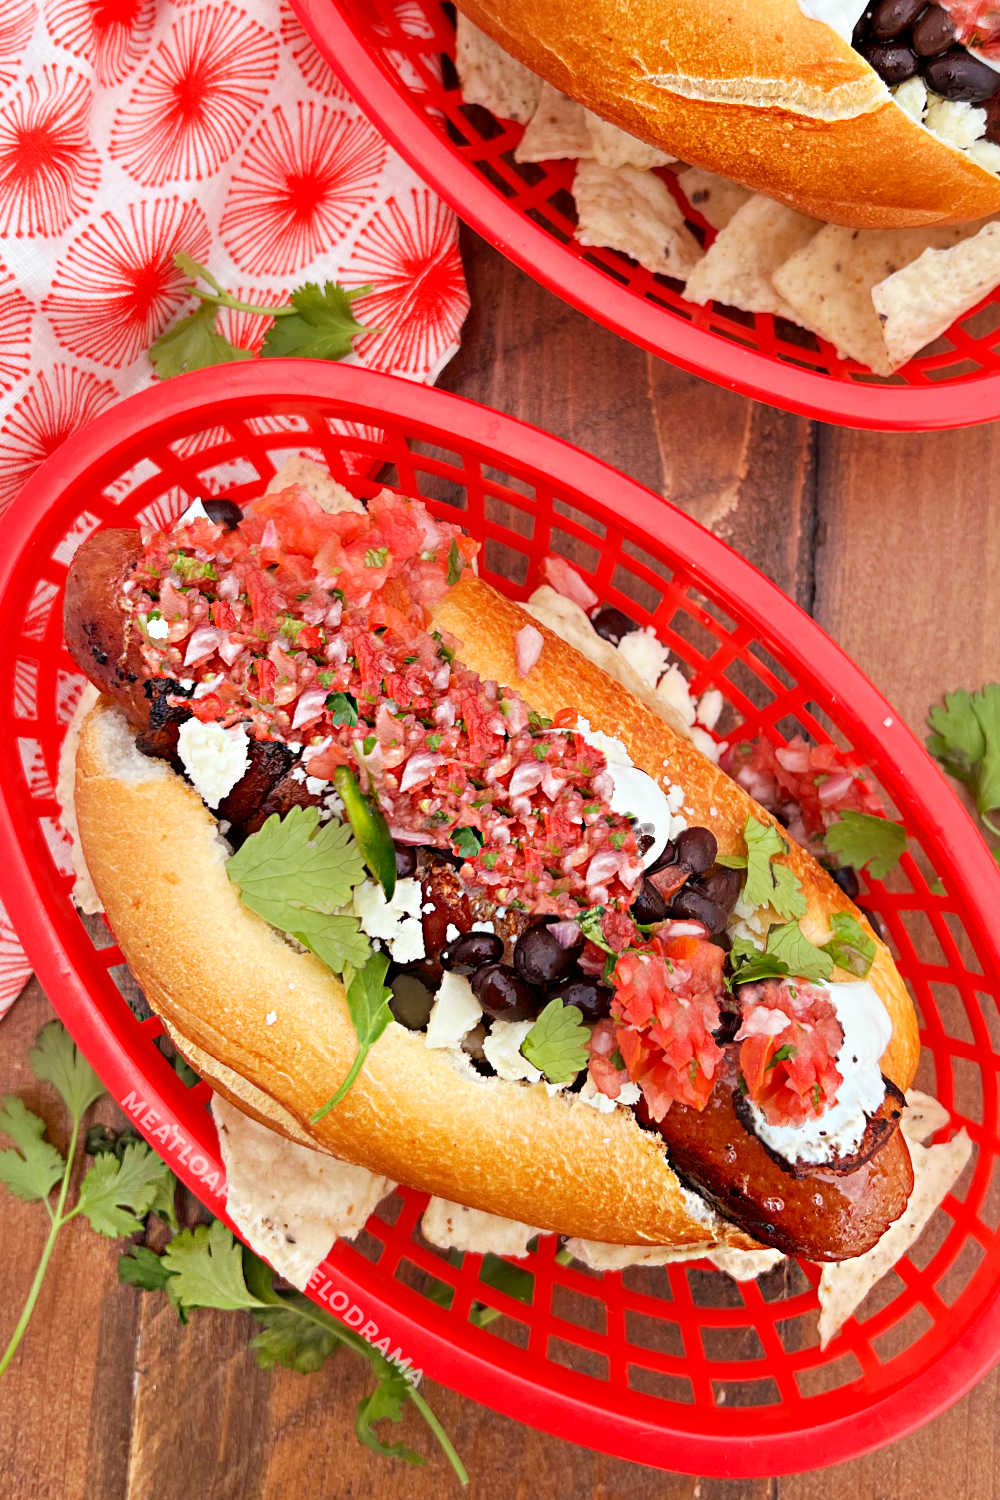 sonoran hot dogs with bacon, pico, cotija cheese, beans and cilantro on the table